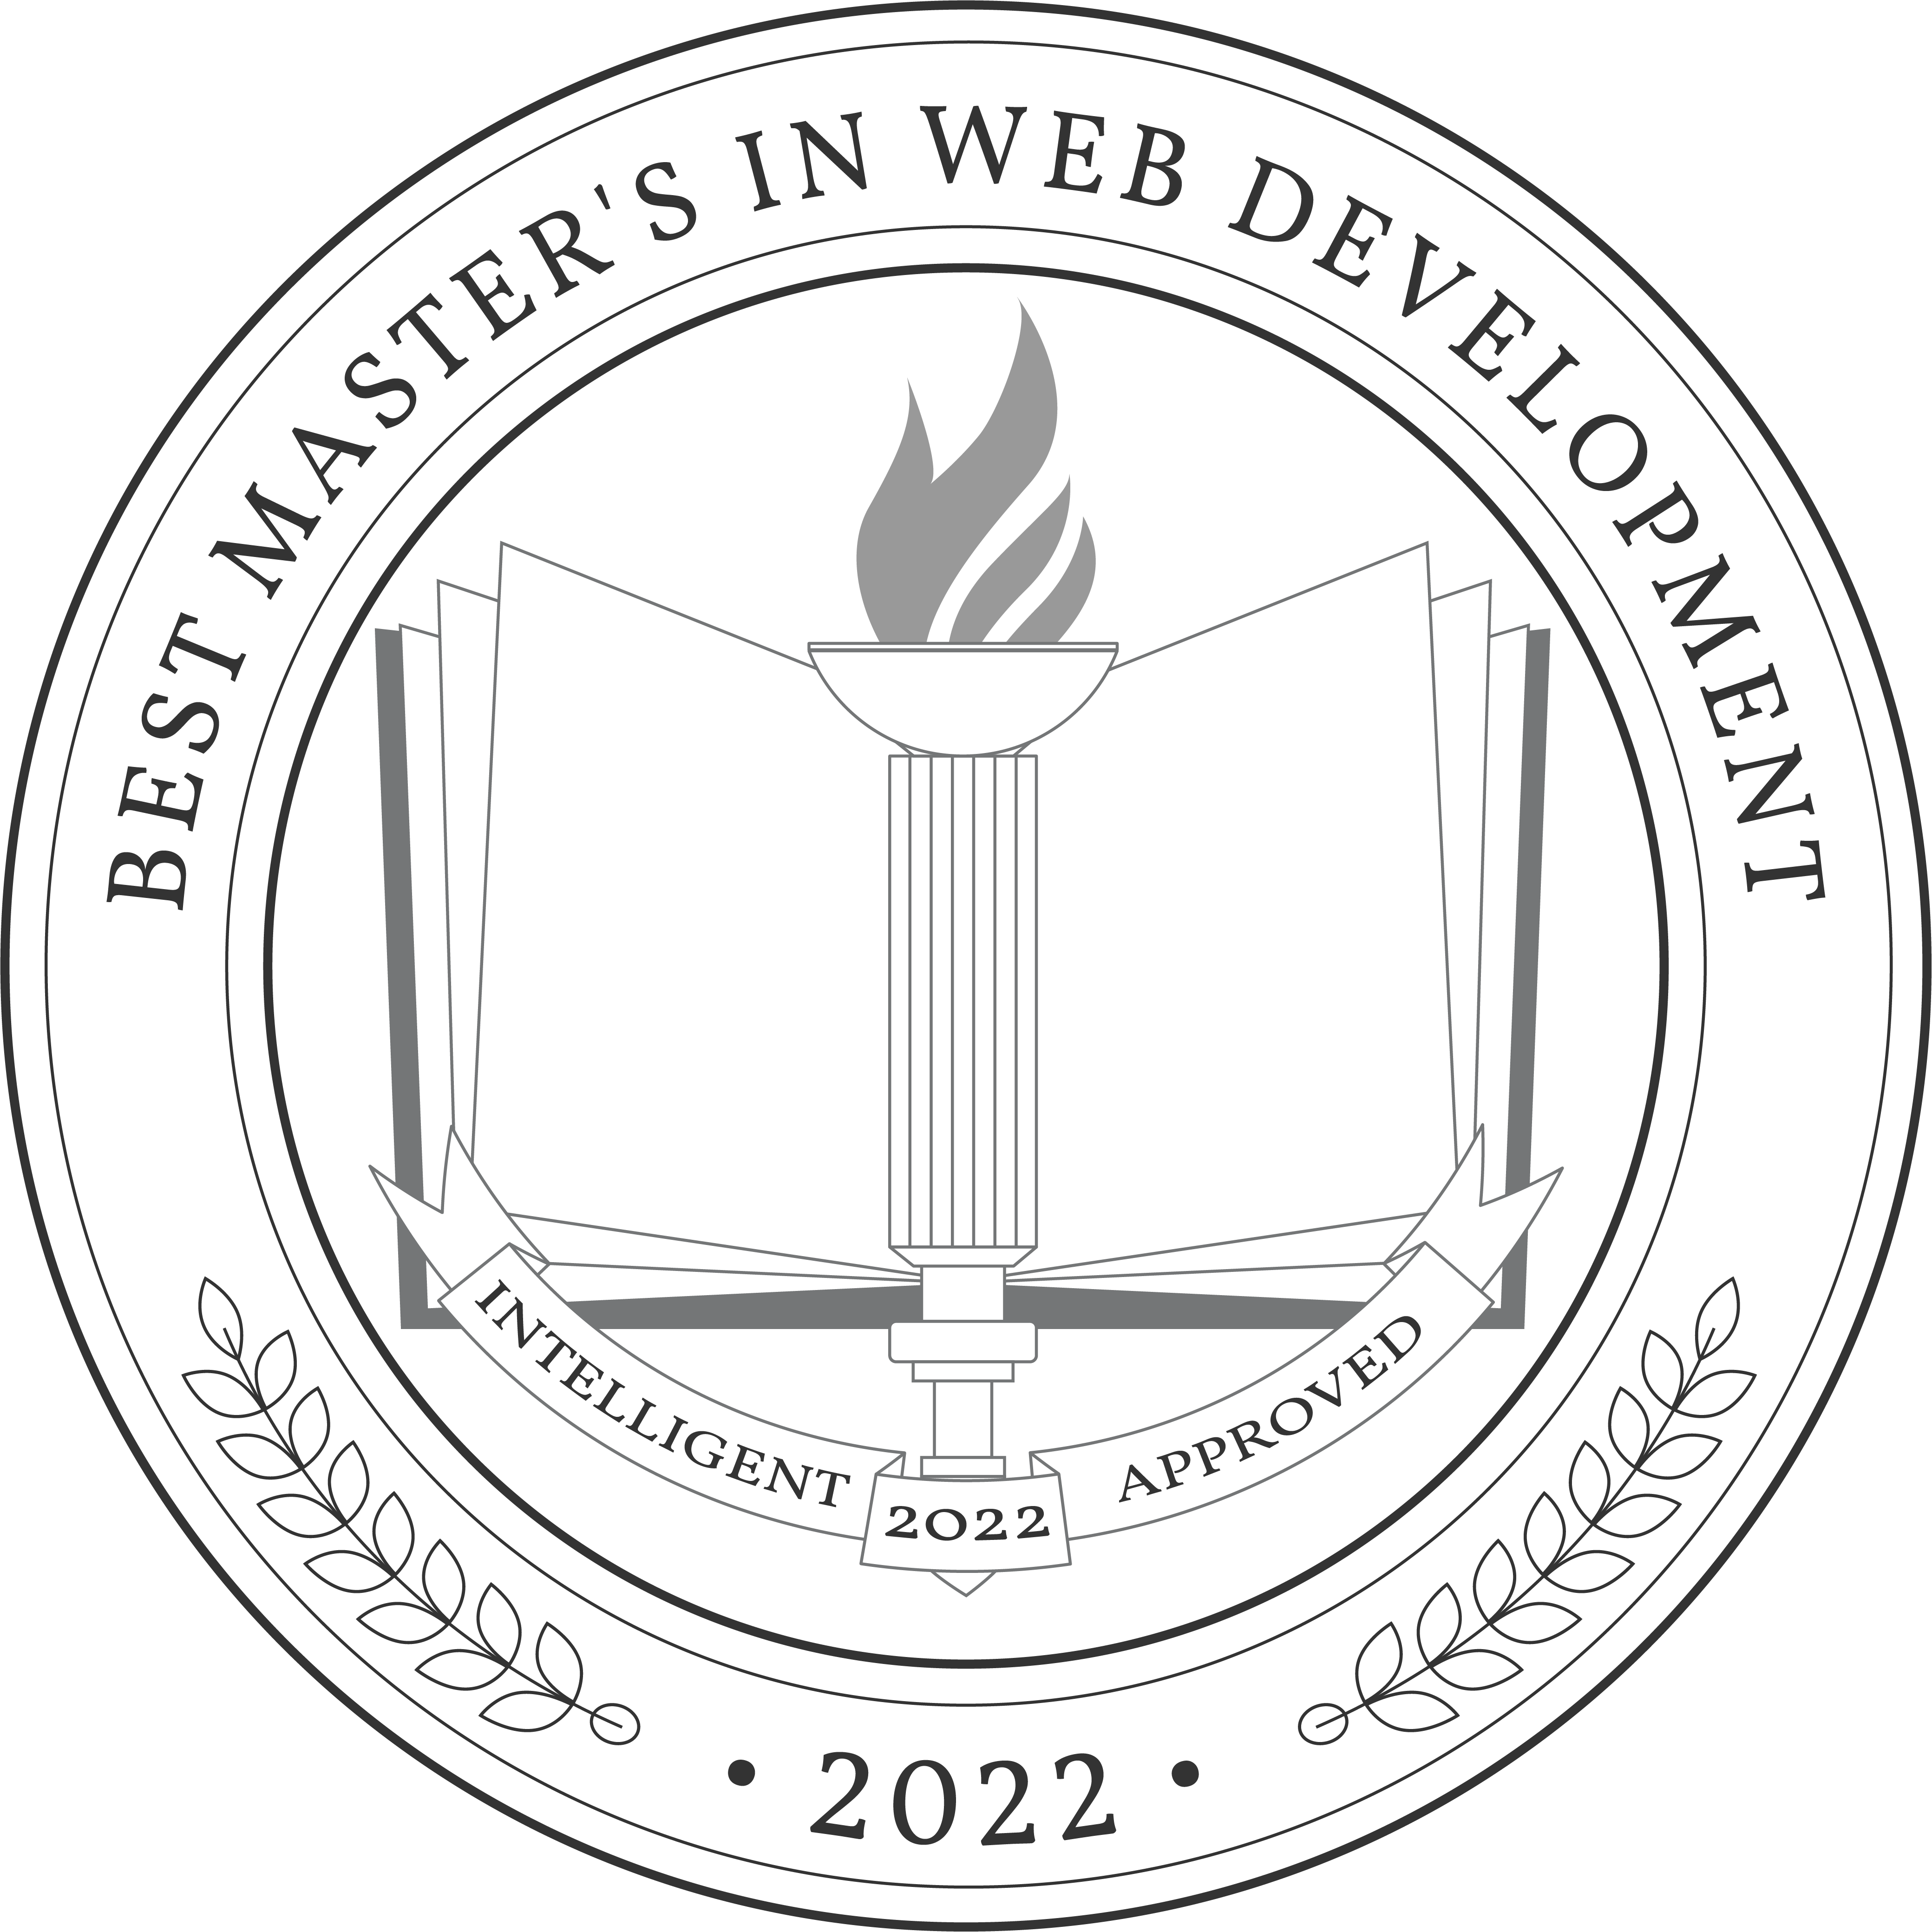 Best-Masters-in-Web-Development-Badge.png